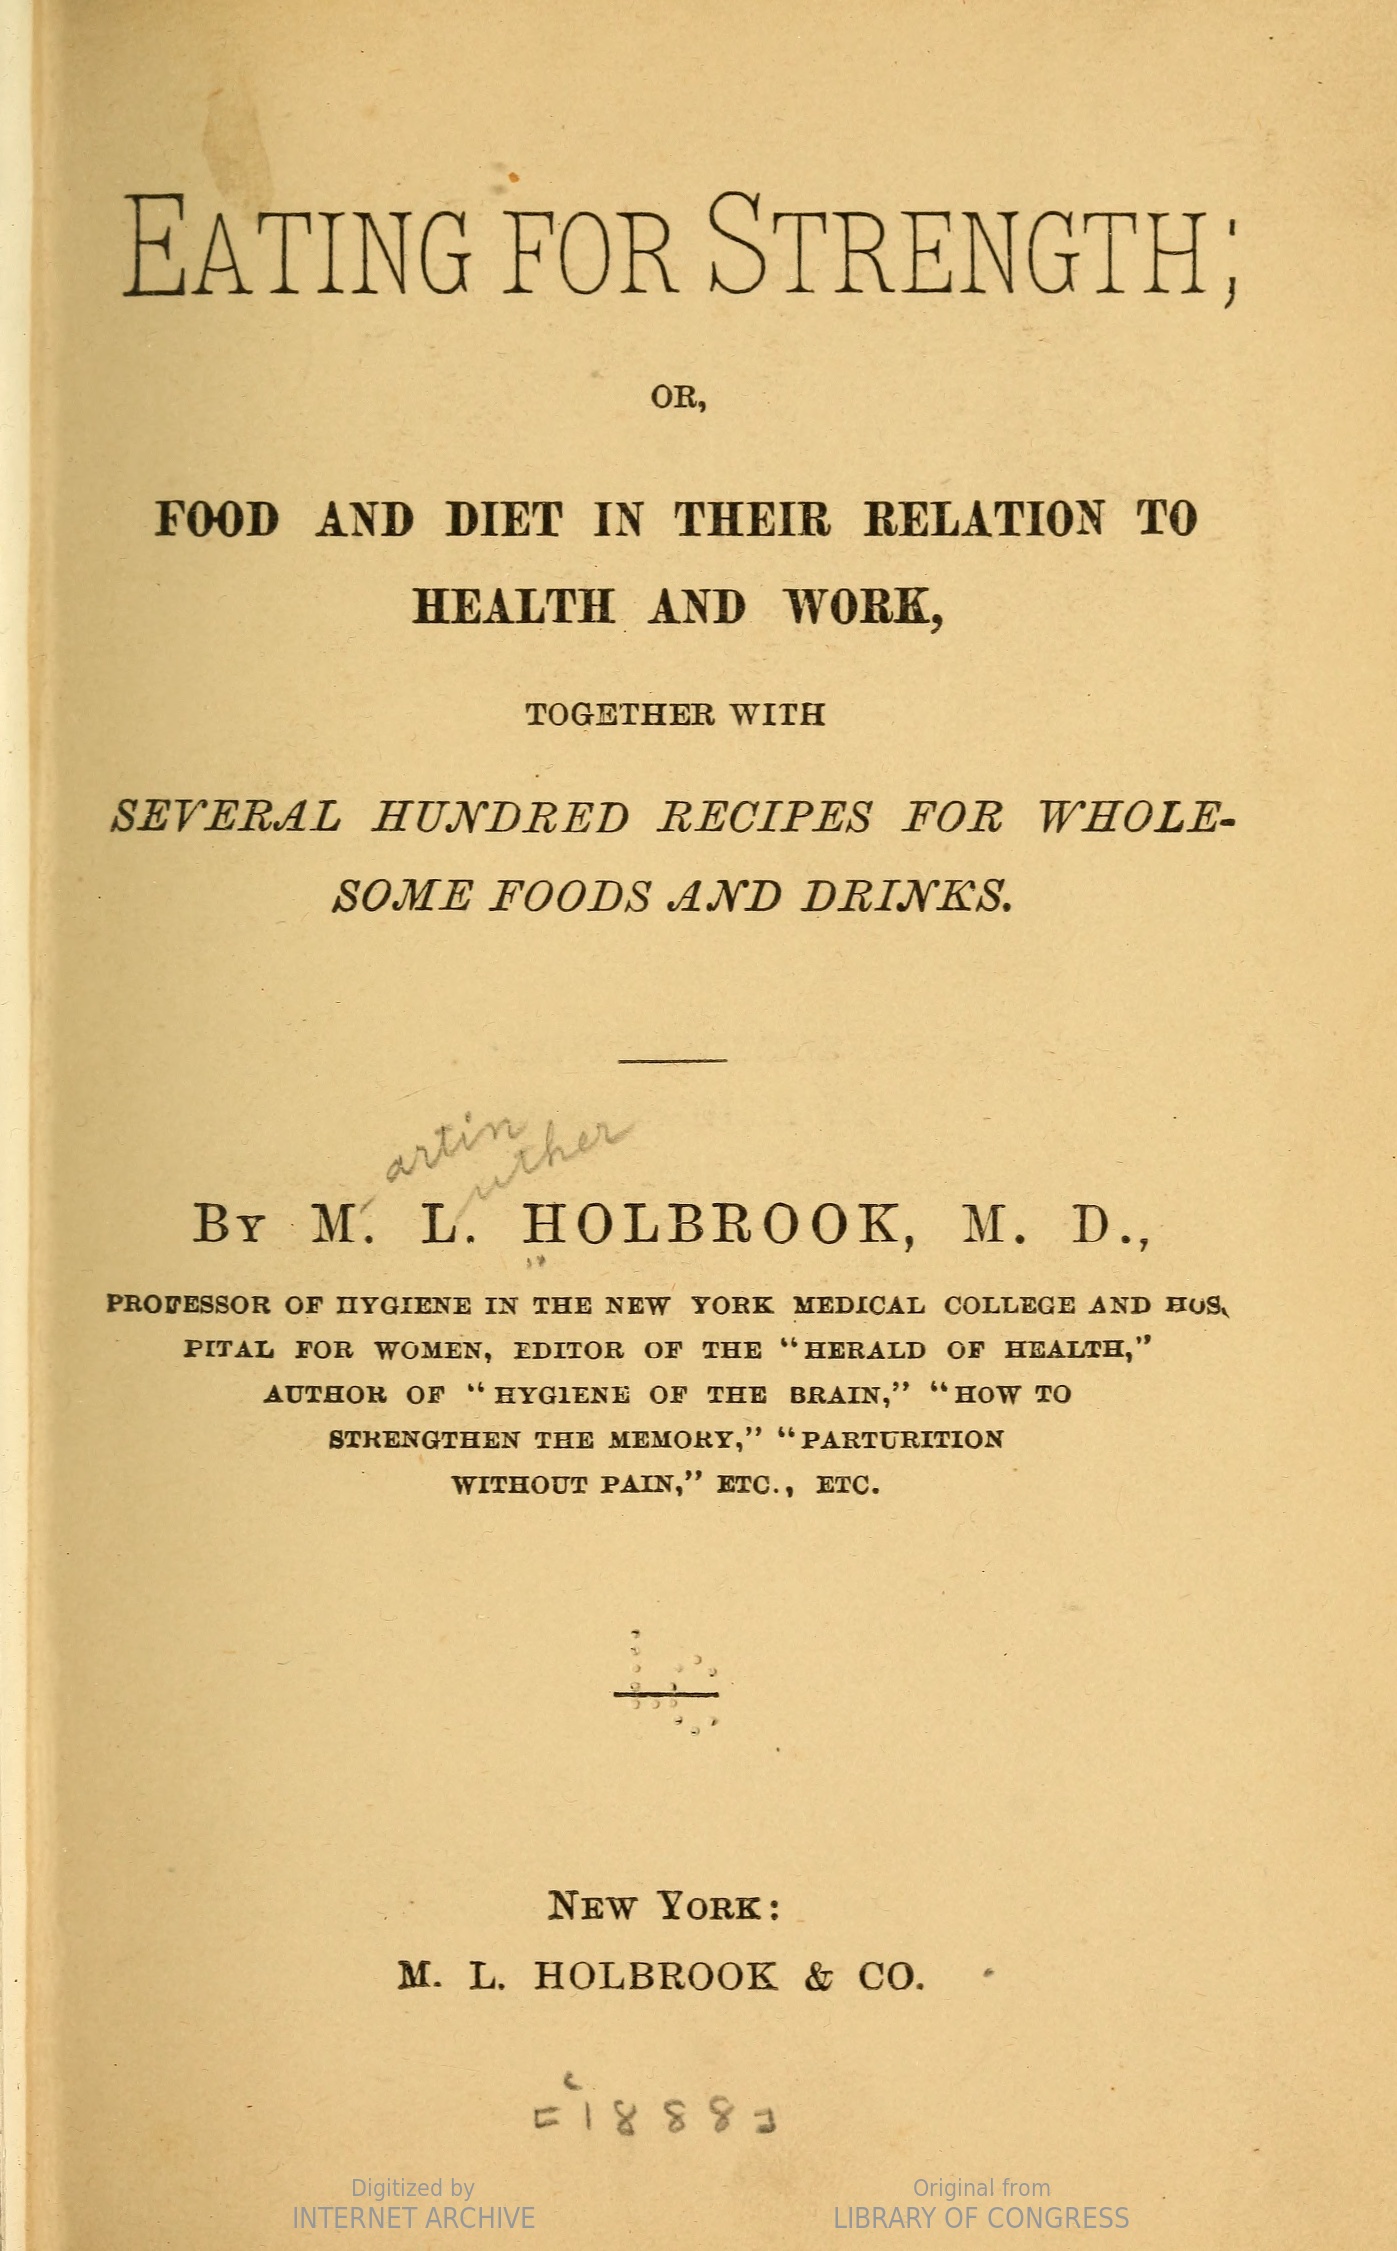 Title page of Eating for Strength. Black typeface on yellowed paper. 